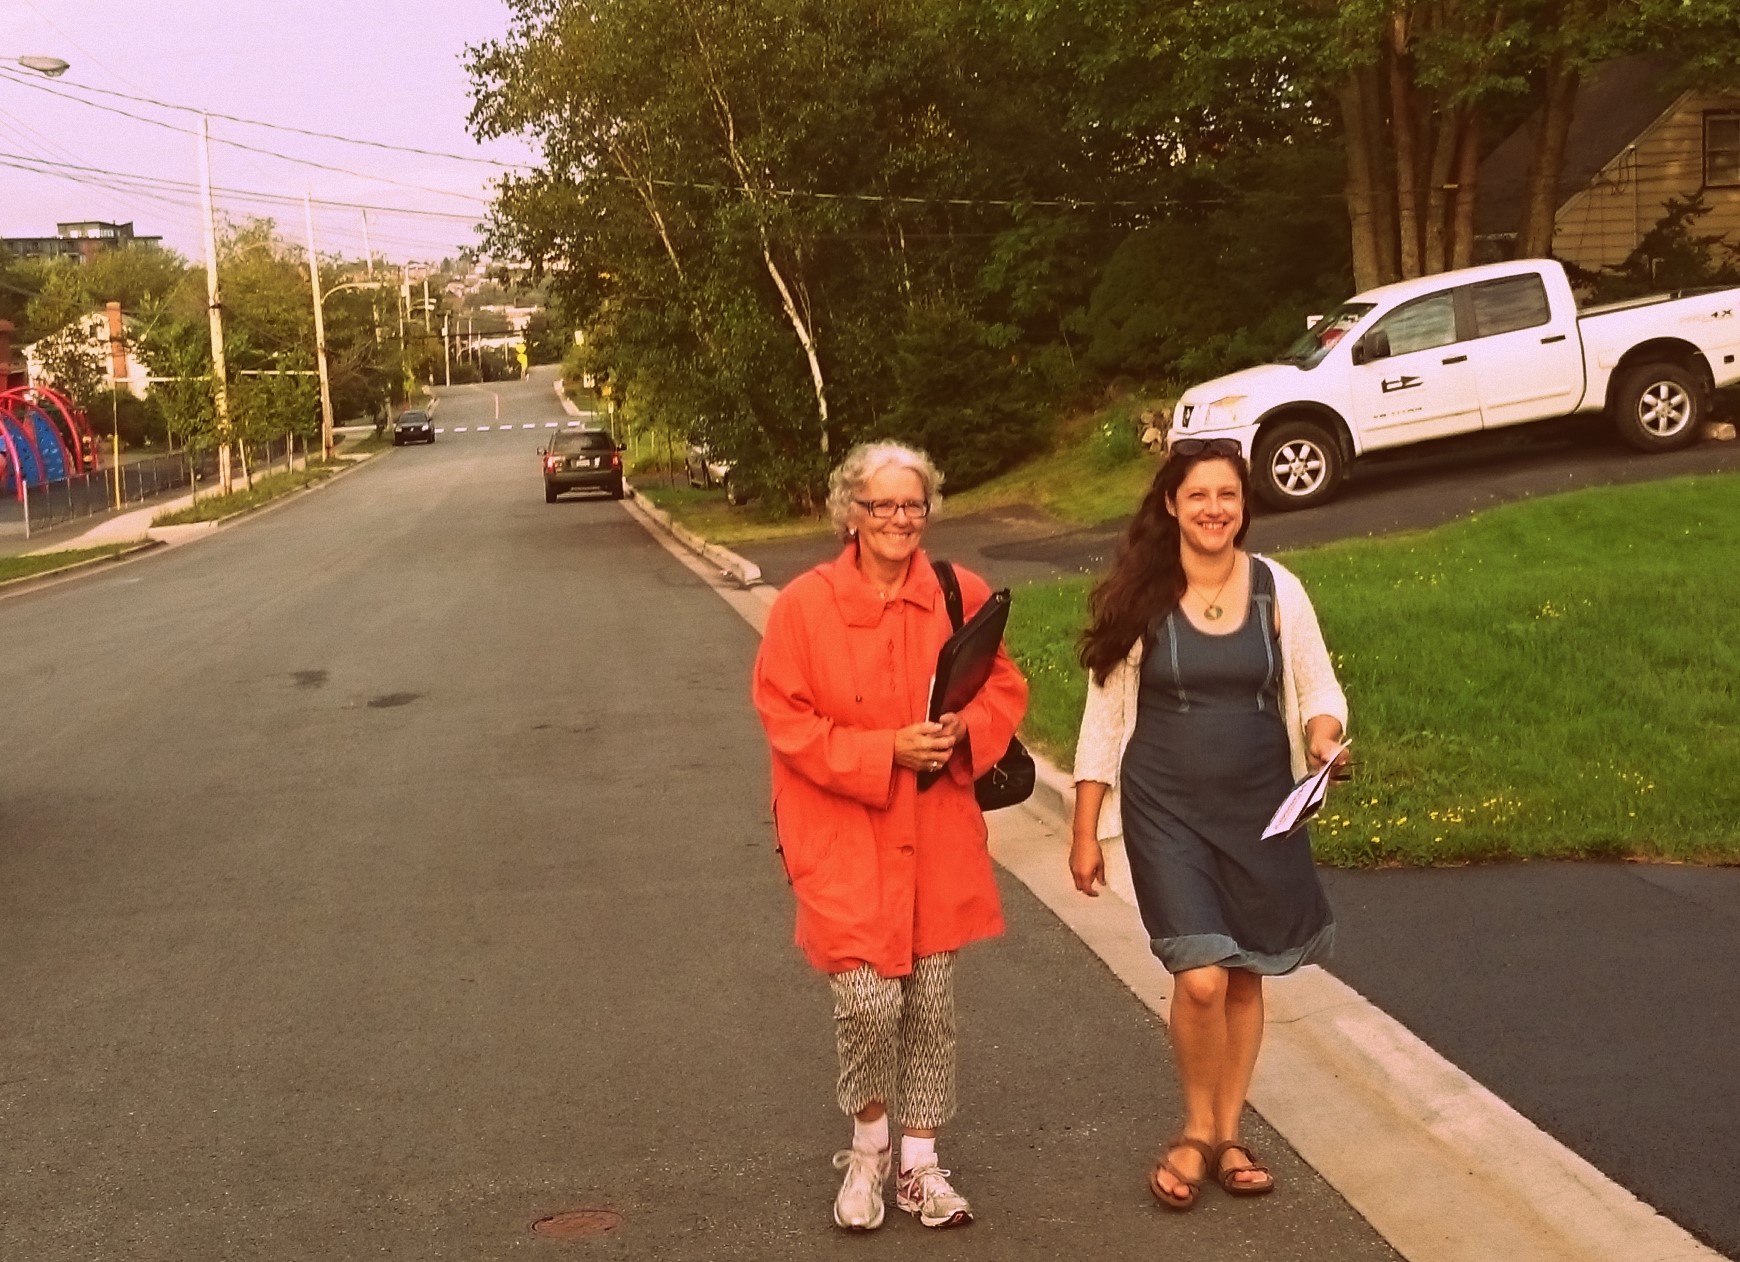 Alexa with candidate Joanne Hussey canvassing for the 2015 federal election.